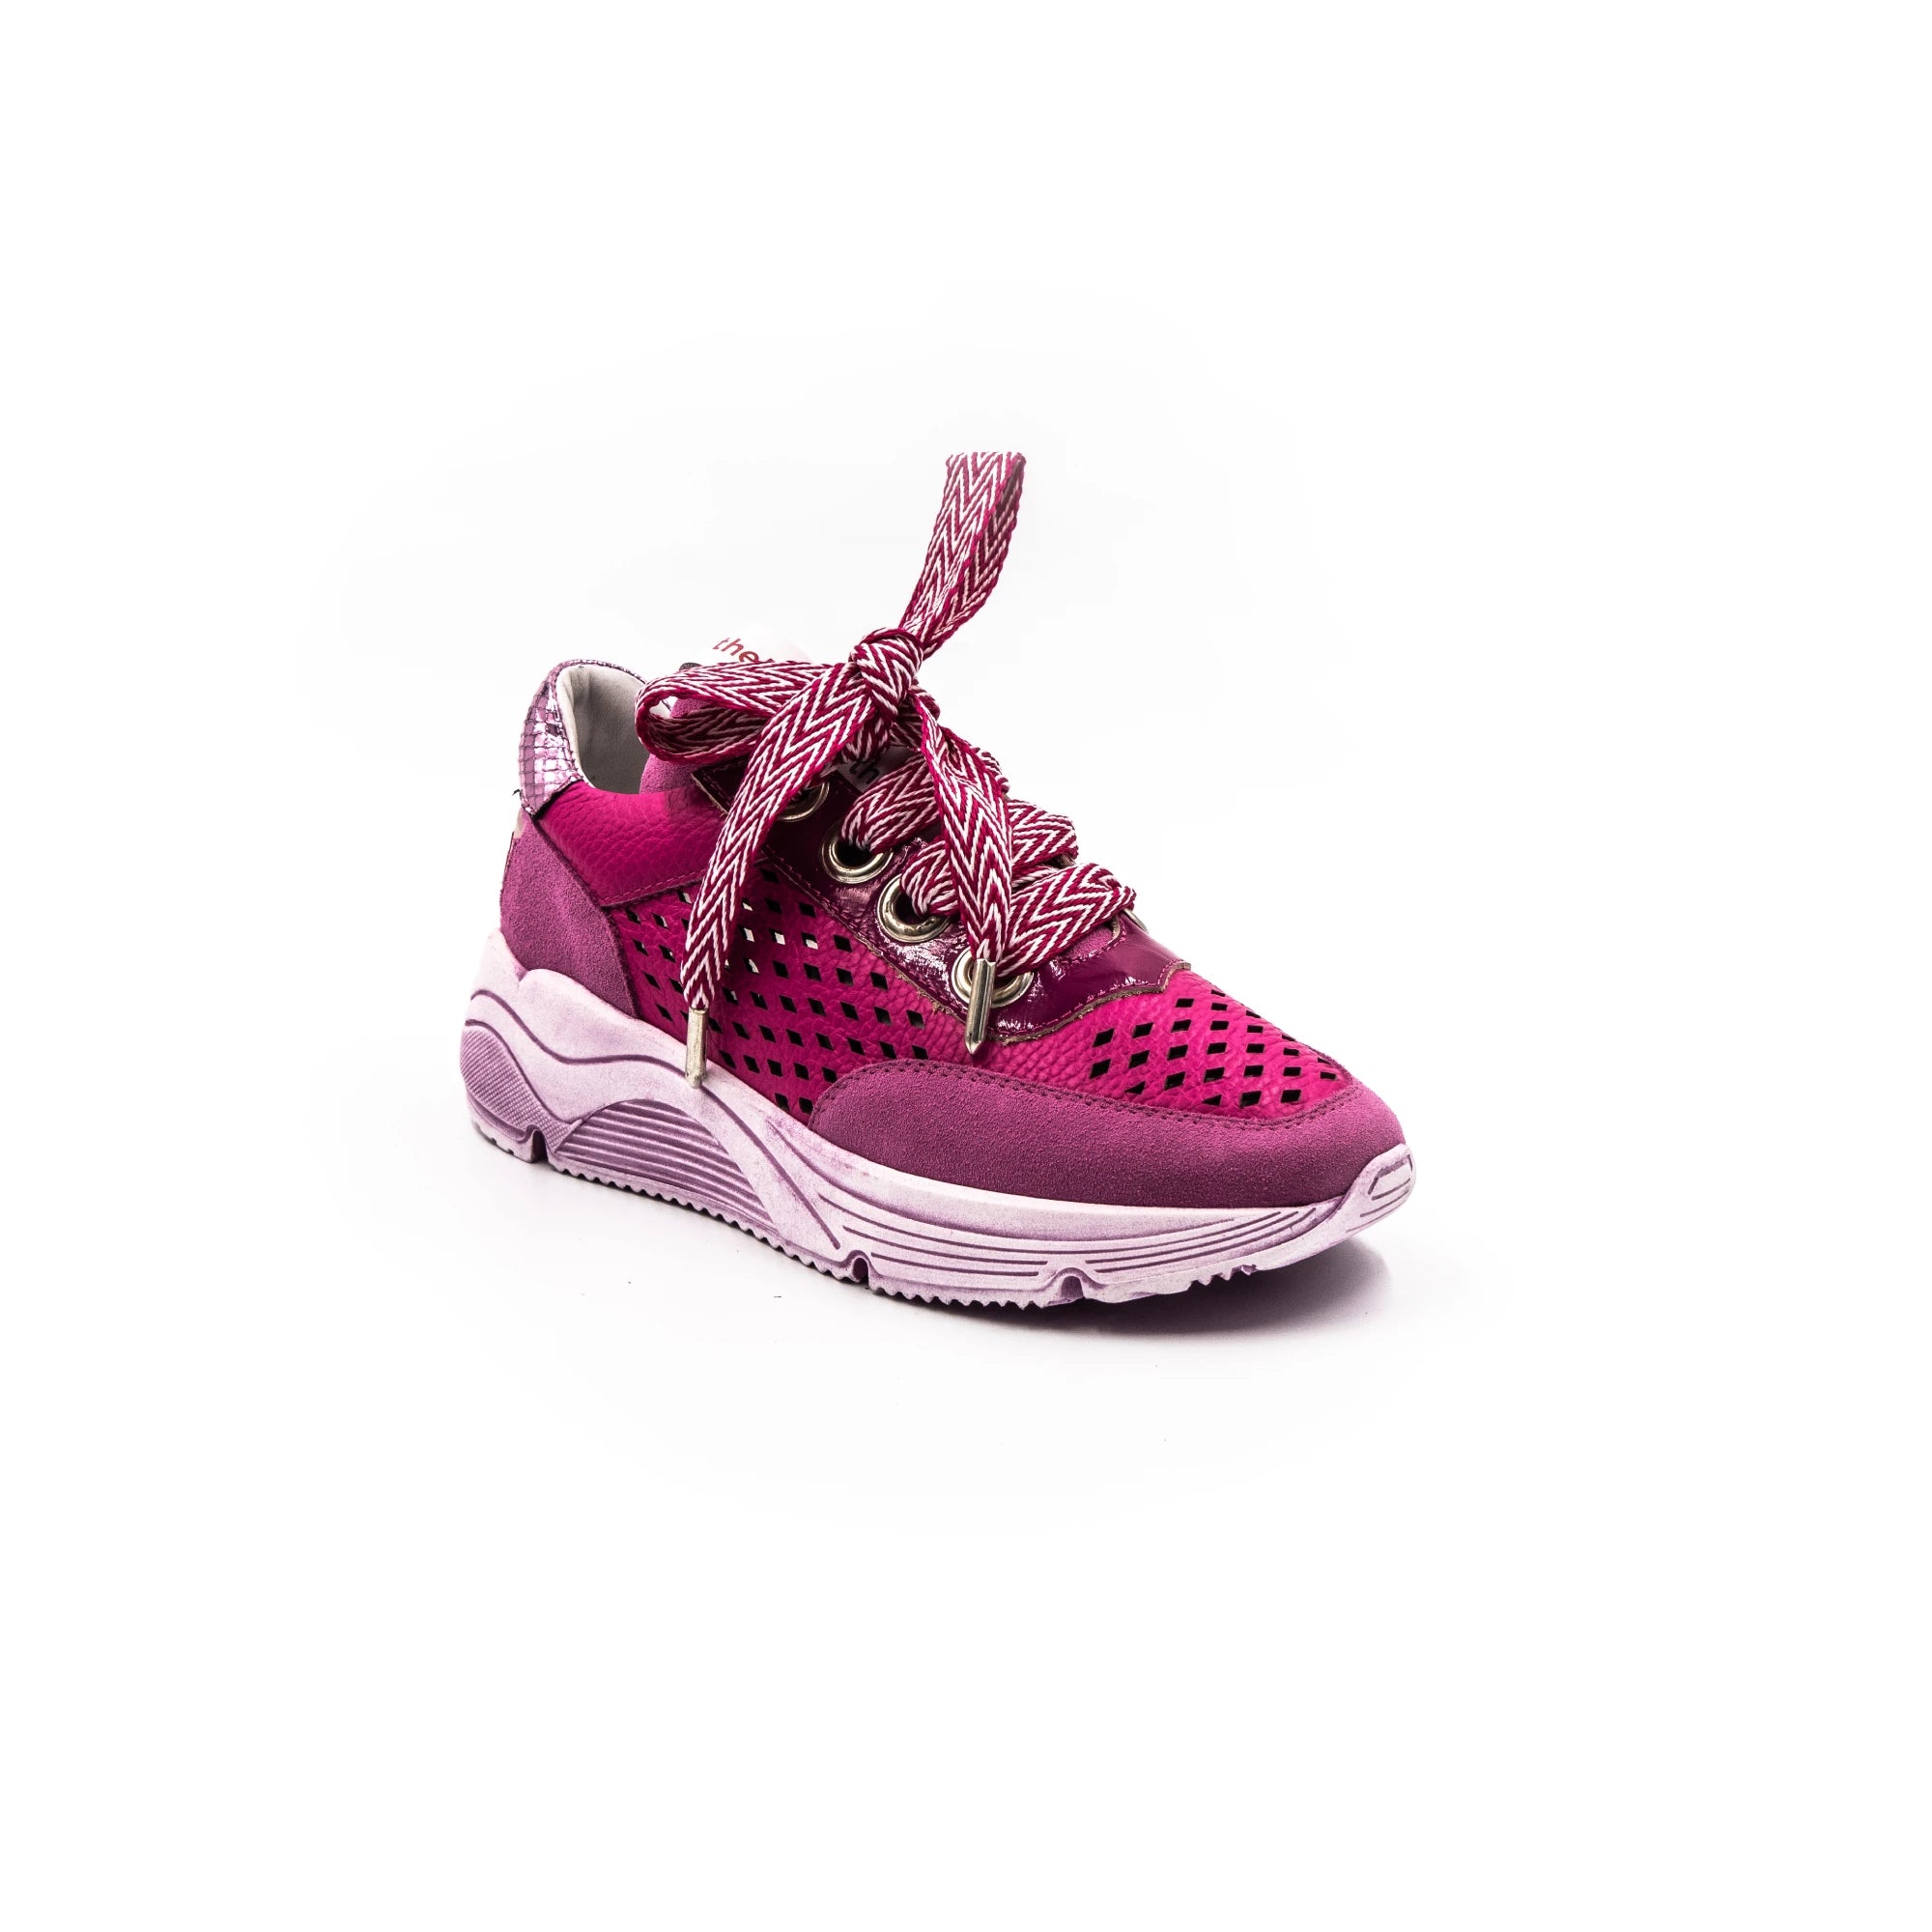 Pink perforated sneakers.